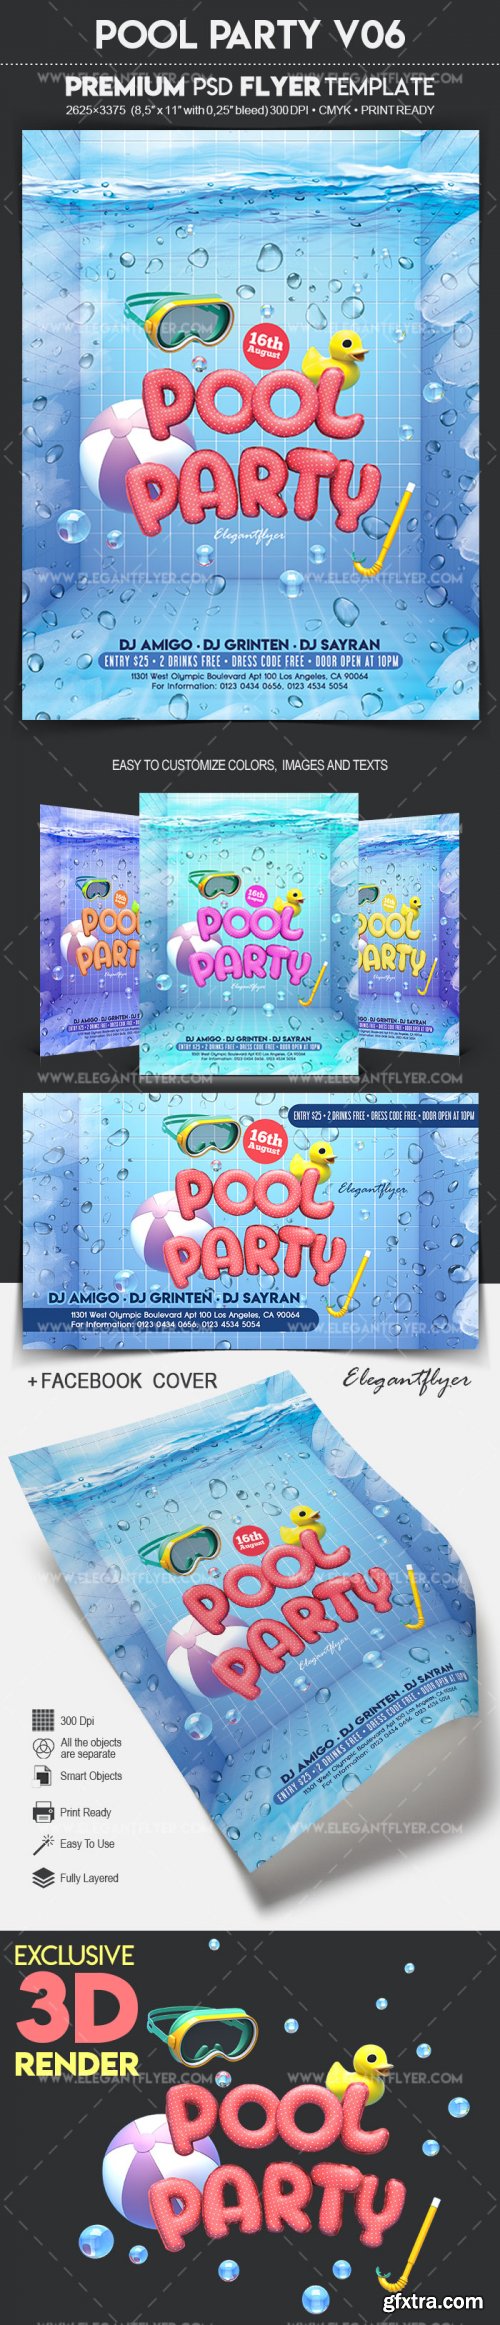 Pool Party V06 2018 Flyer PSD Template